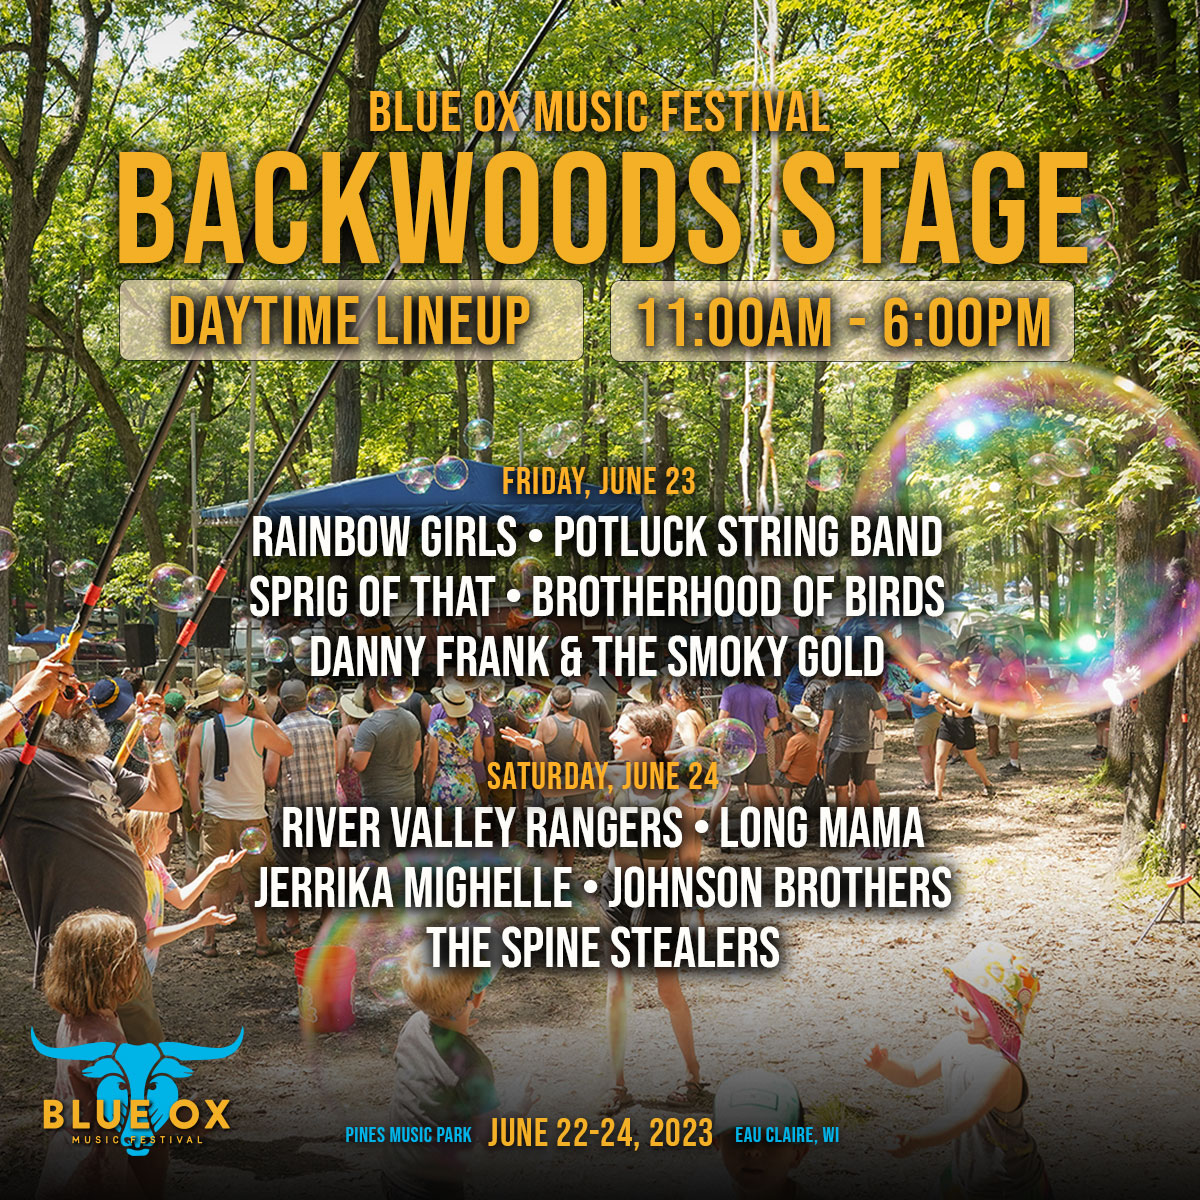 Backwoods Stage Lineup Blue Ox Music Festival